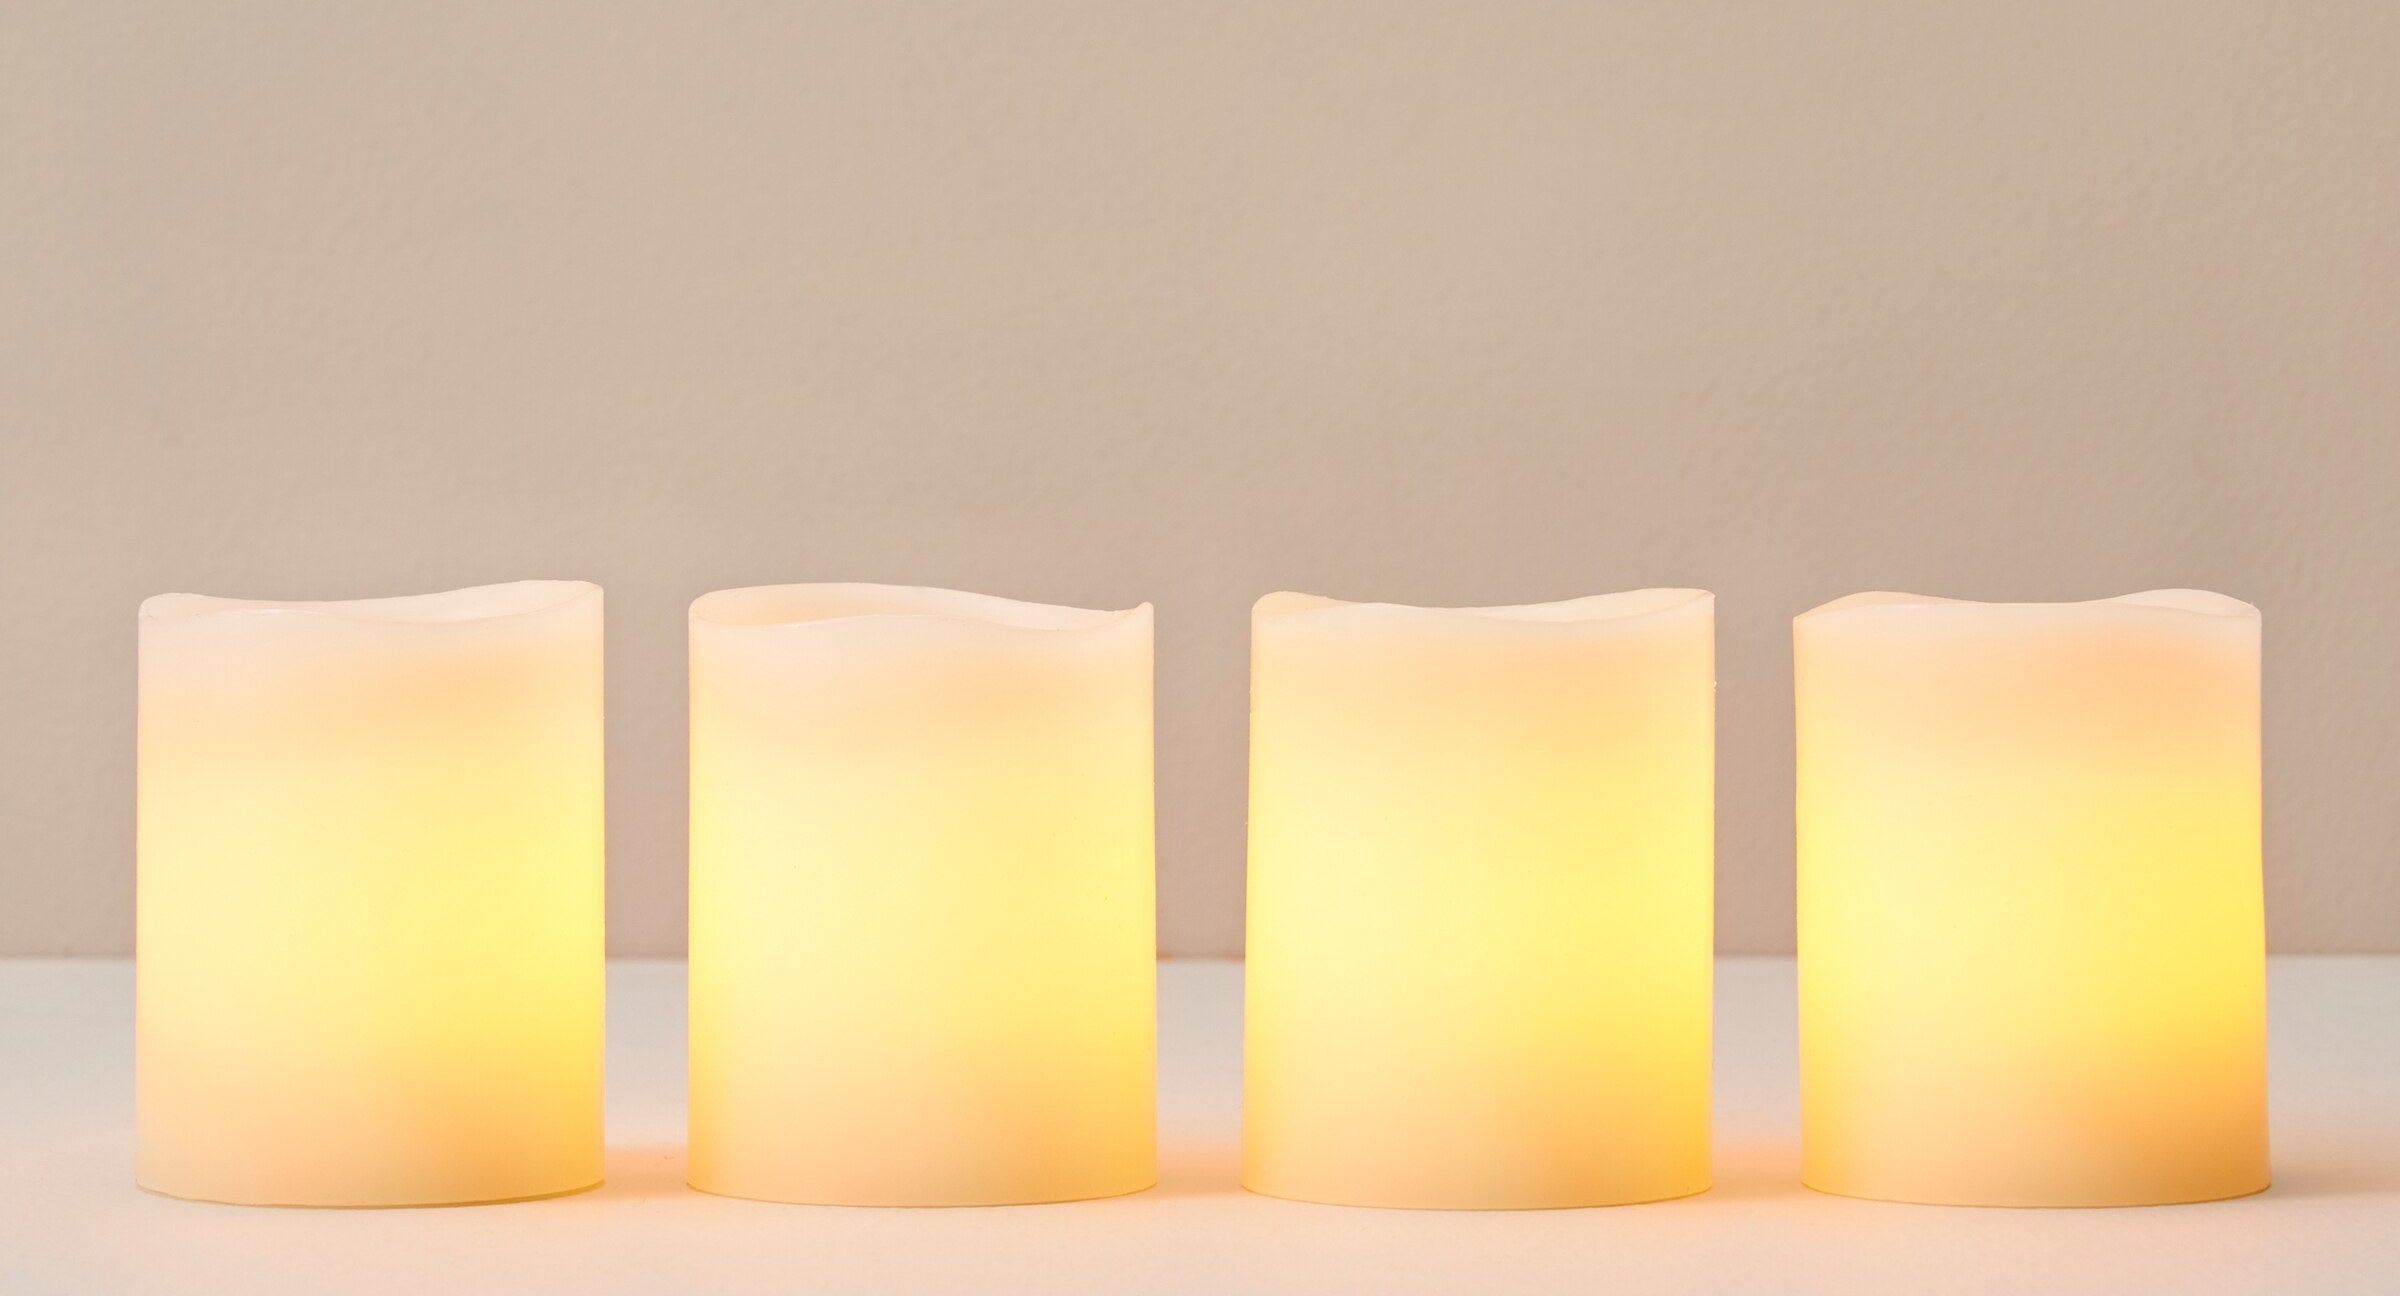 Four LED candles in a row